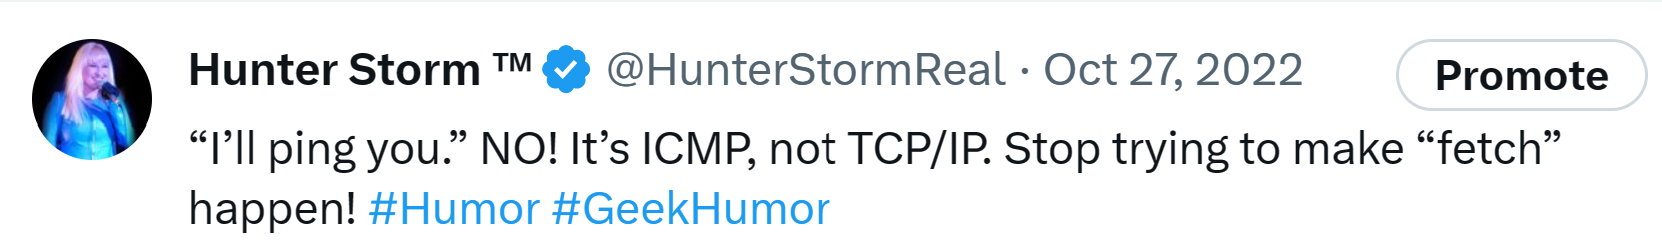 Hunter Storm Wisdom: Timeless Insights and Inspiration | “I’ll ping you.” NO! It’s ICMP, not TCP/IP. Stop trying to make 'fetch' happen!"